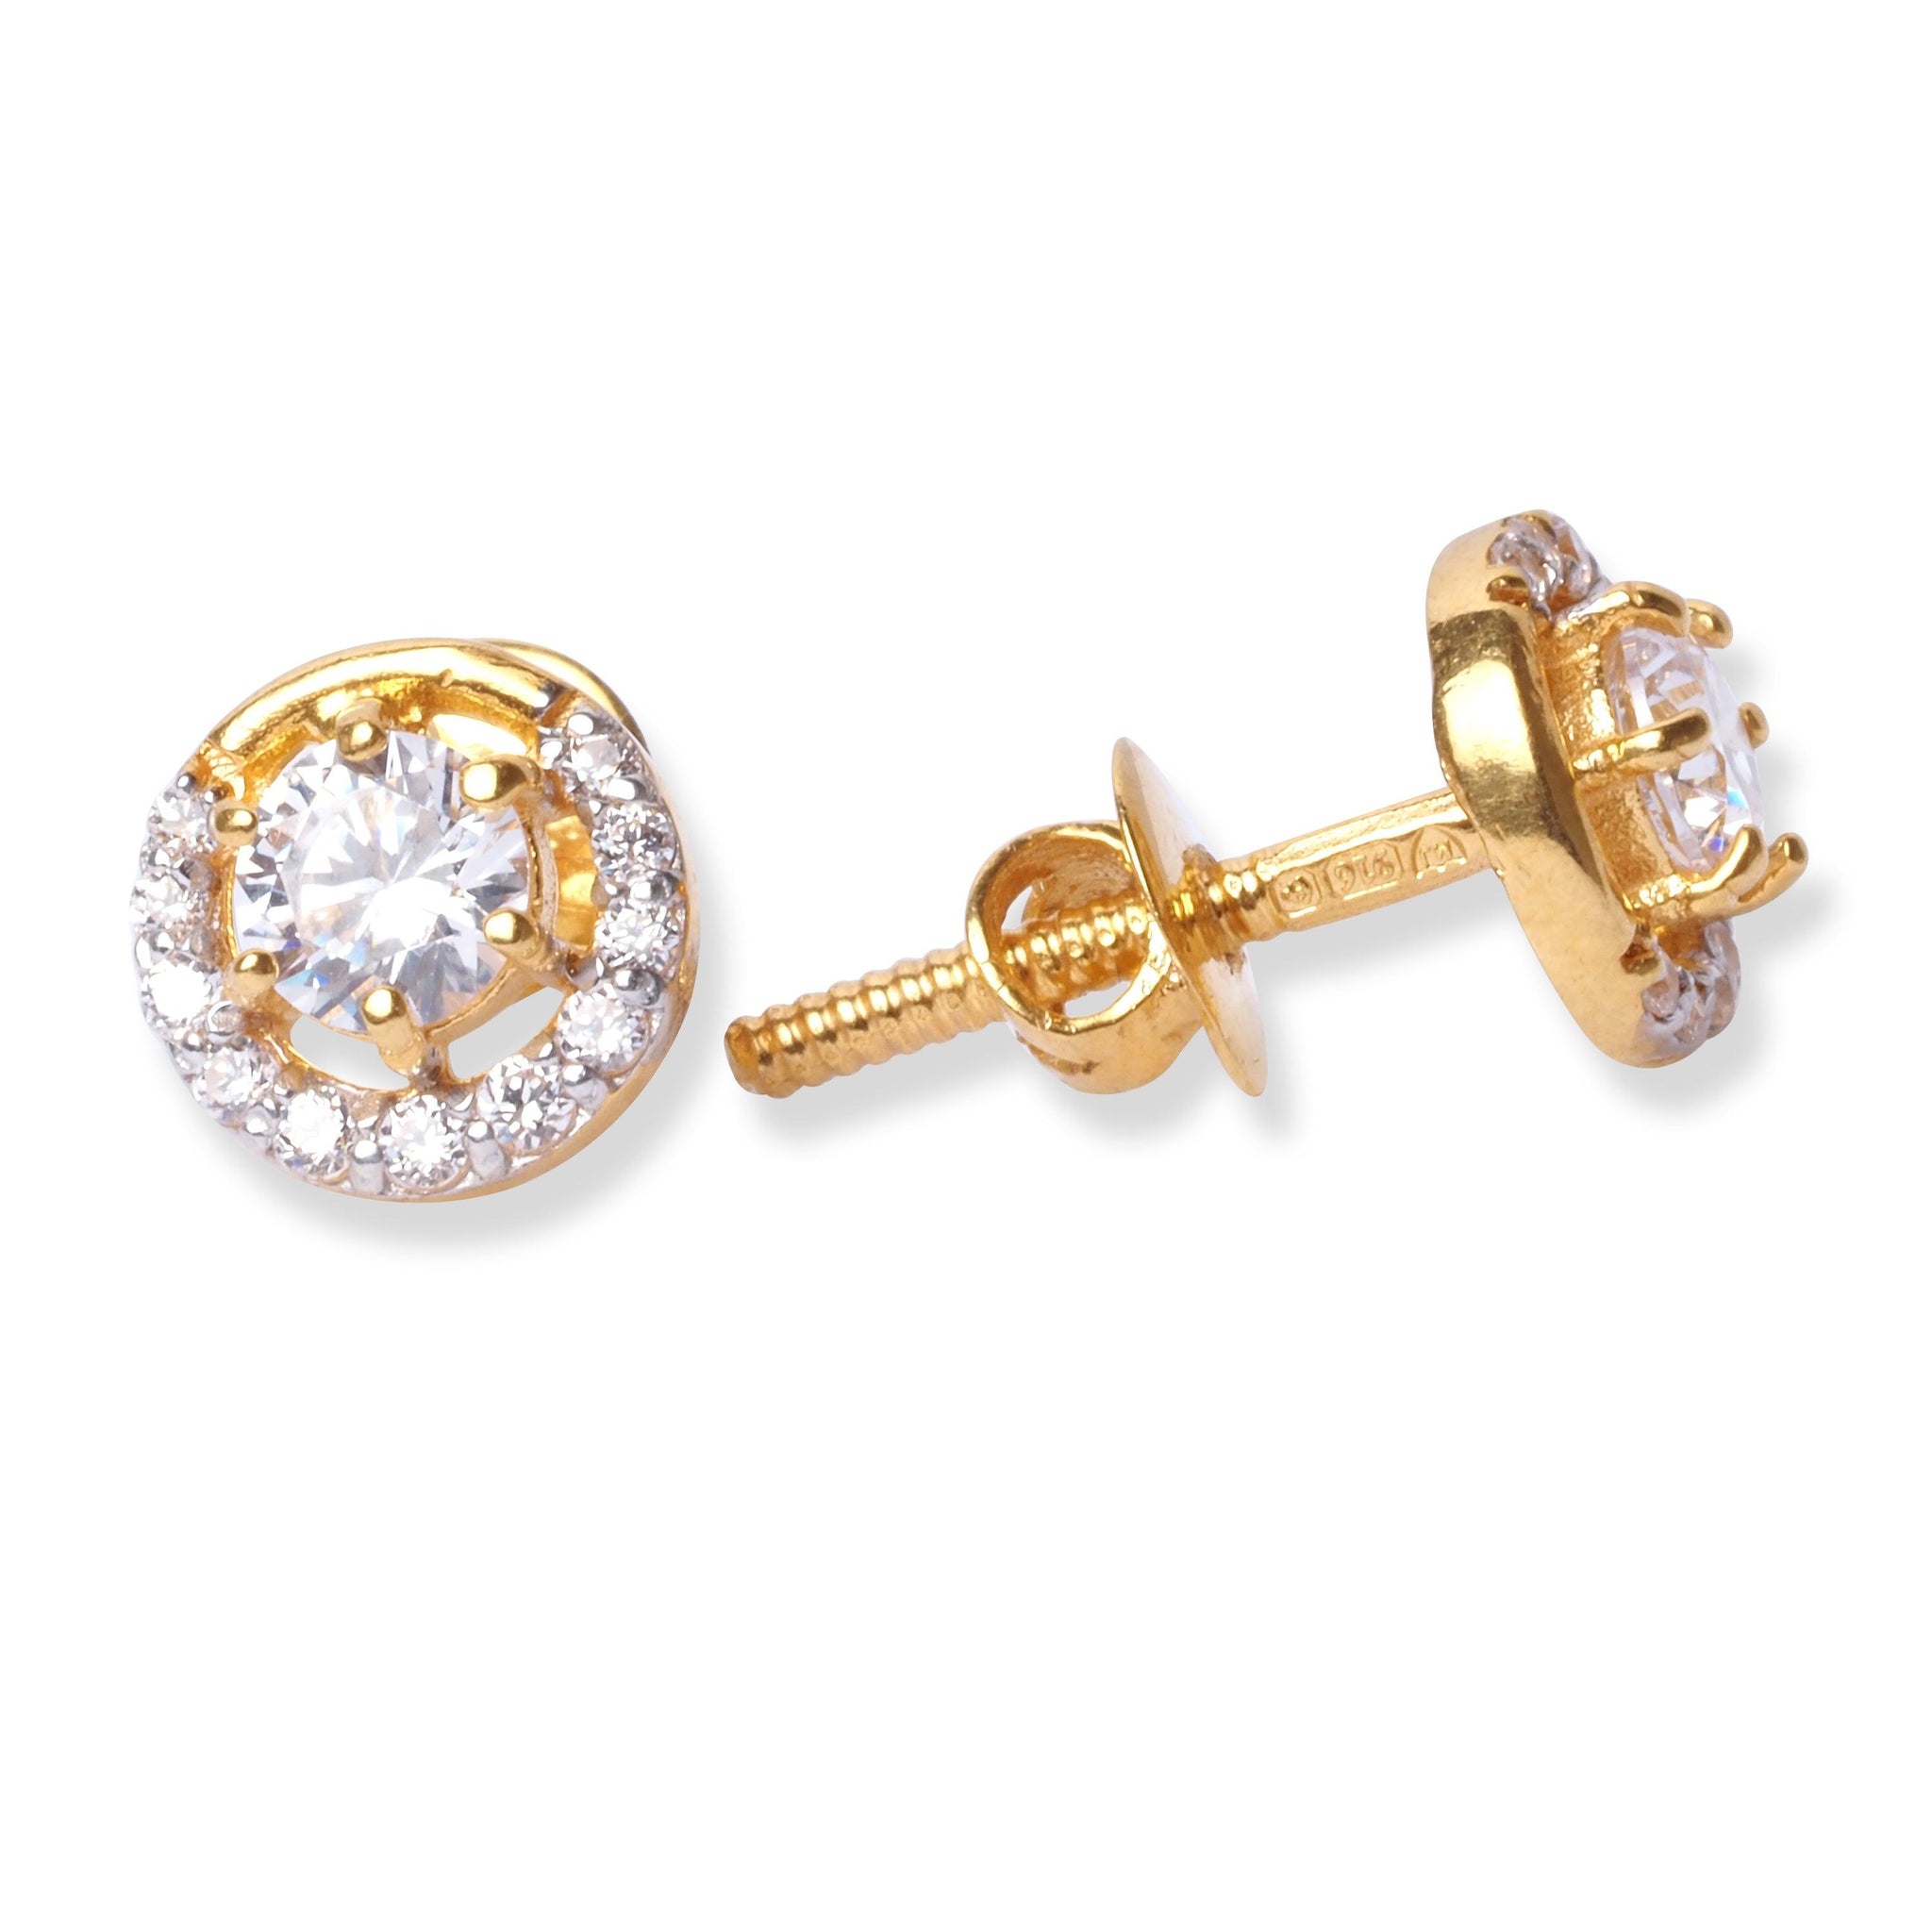 22ct Gold Stud Earrings with Cubic Zirconia Stones E-7971